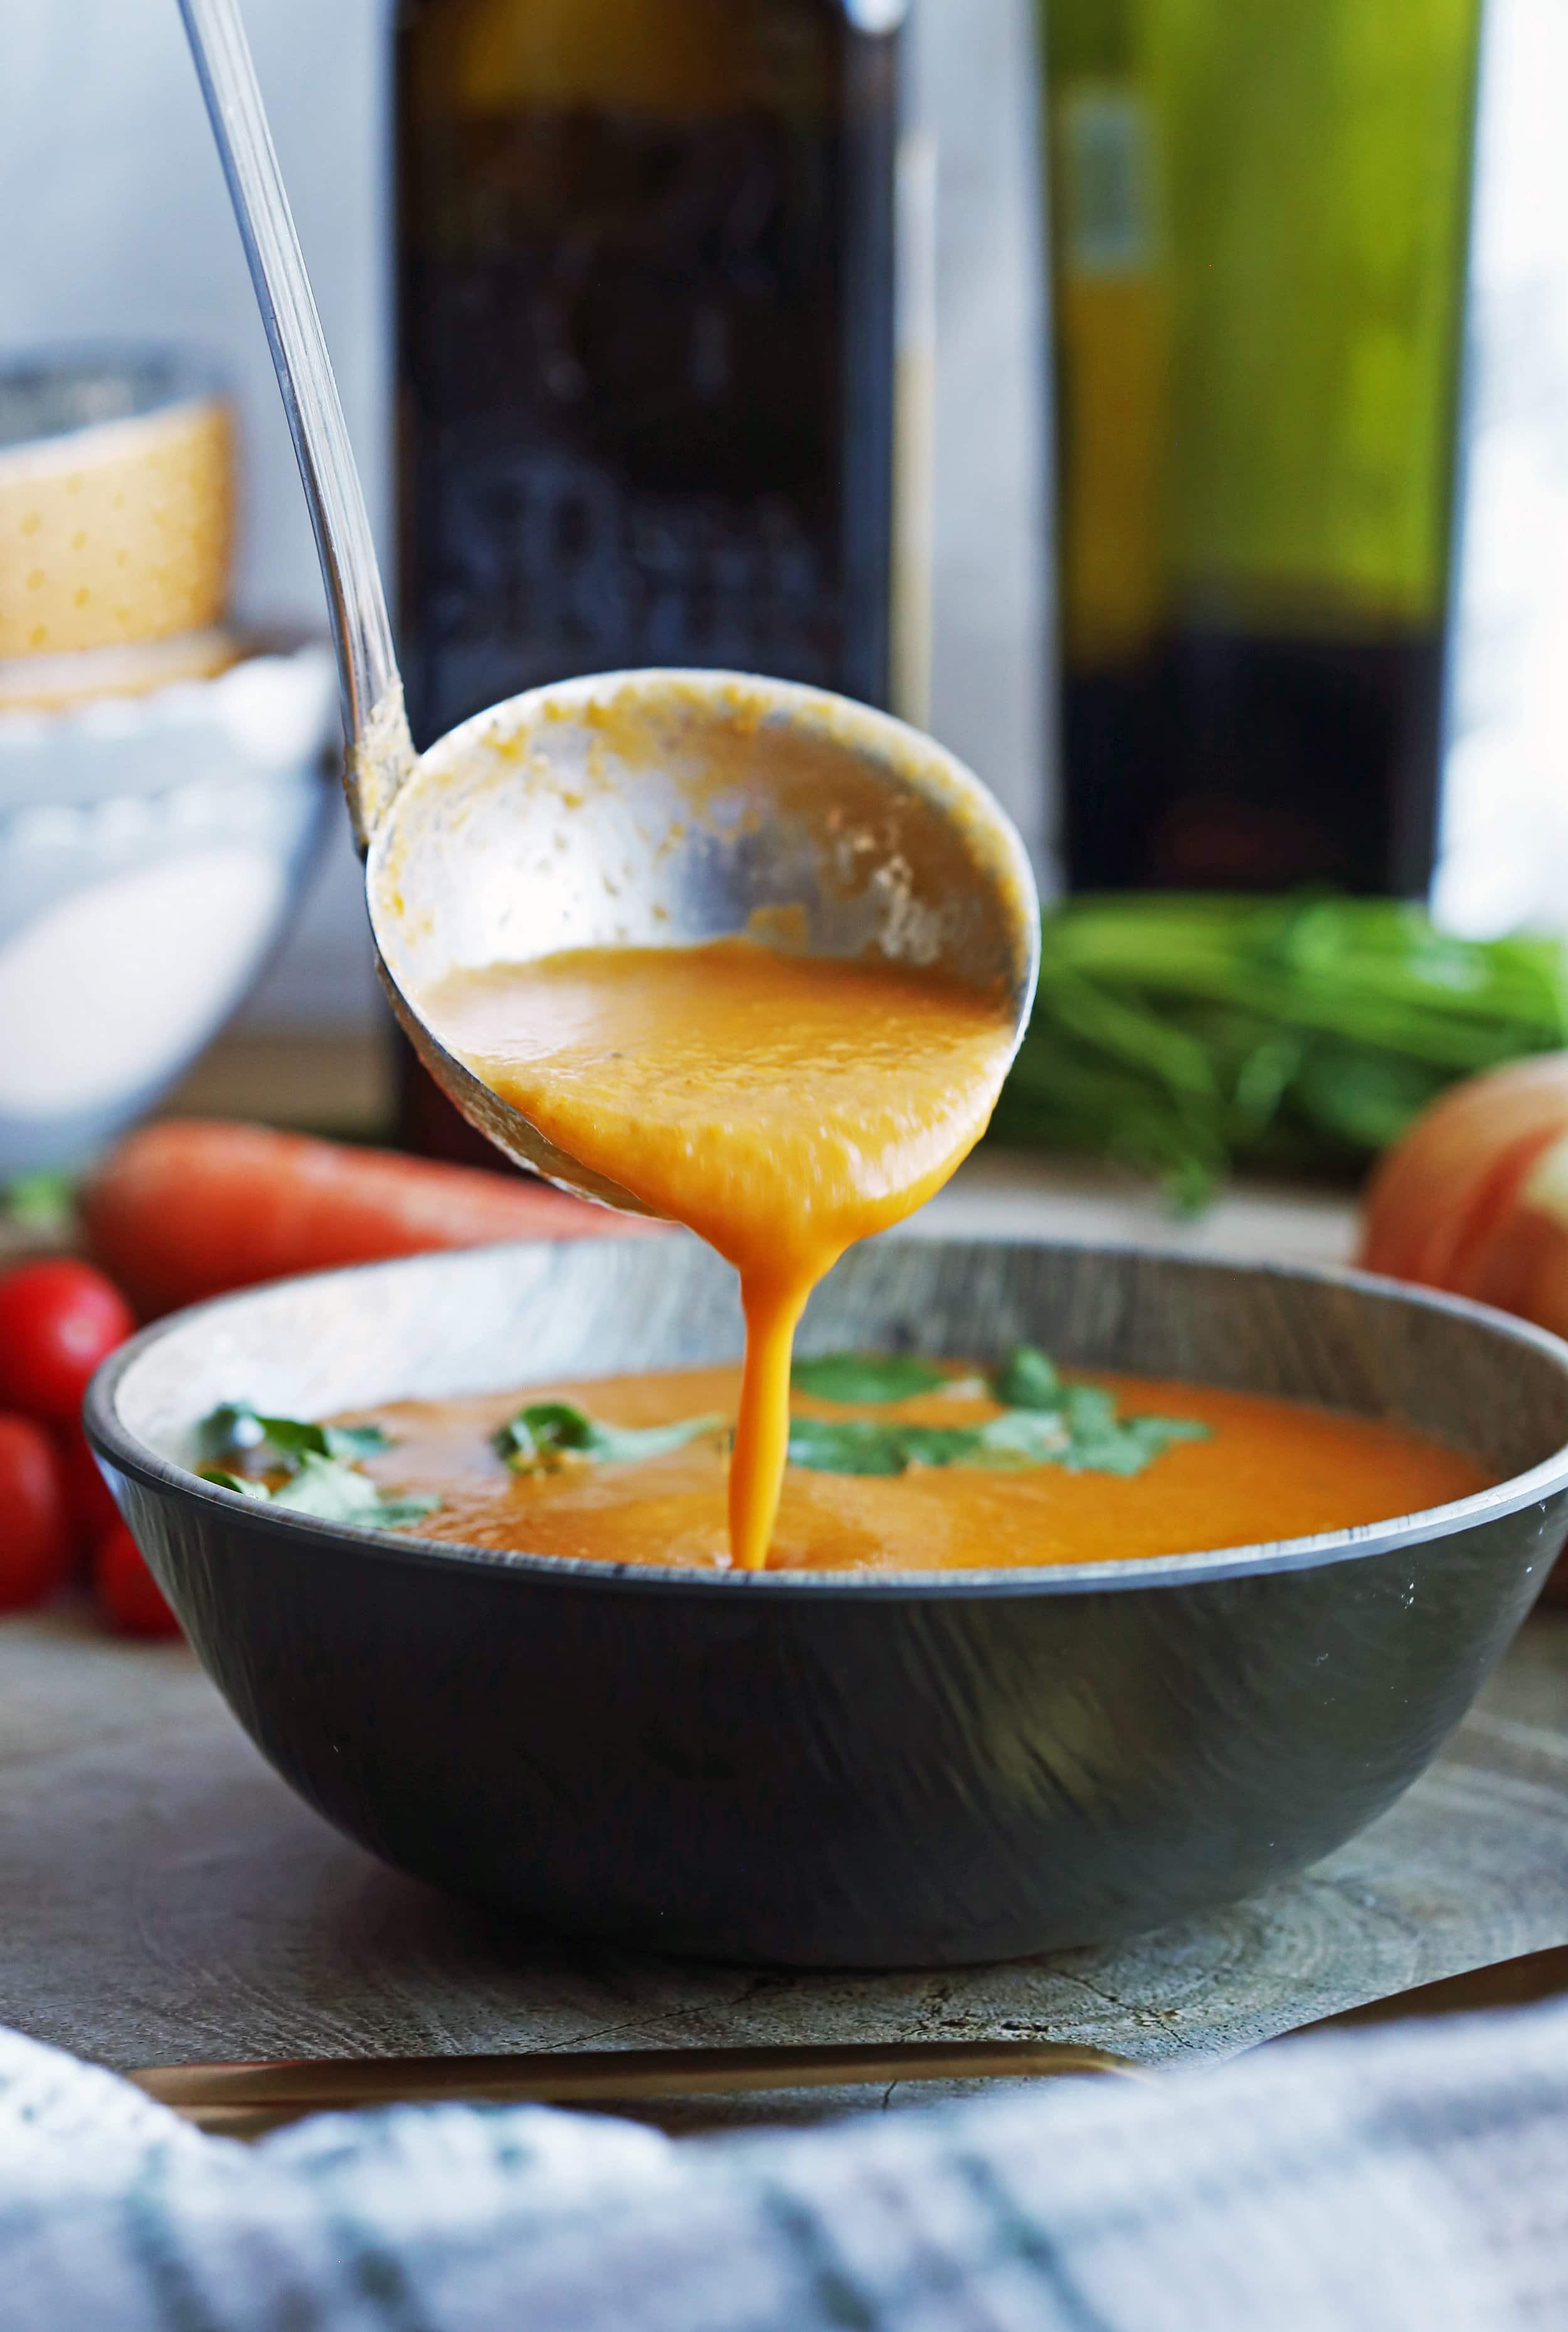 Tomato soup being poured using a metal ladle into a wooden bowl.